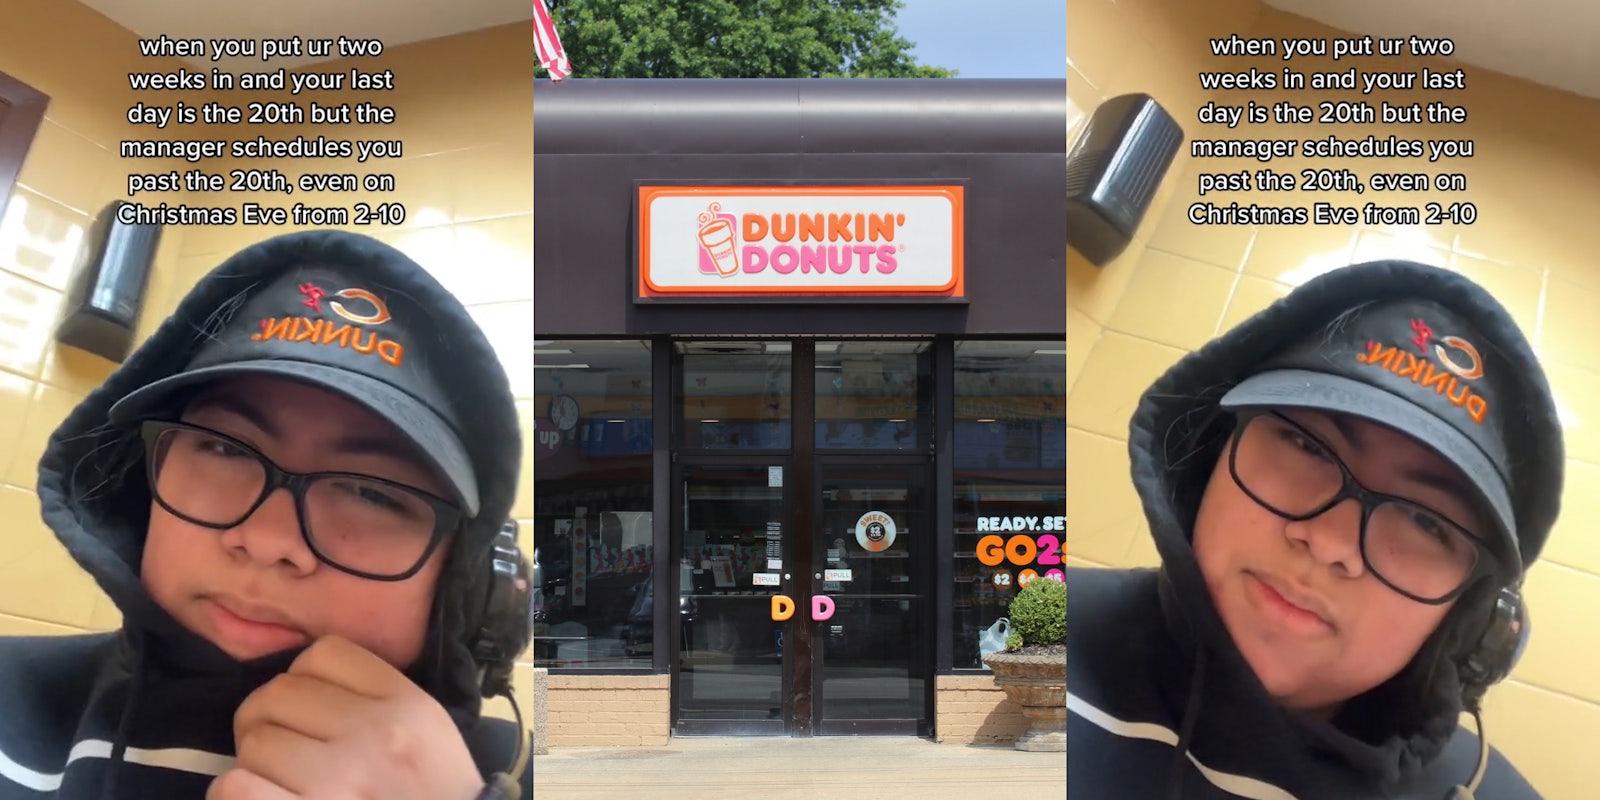 Dunkin worker with caption 'when you put in ur two weeks in and your last day is the 20th but the manager schedules you past the 20th, even on Christmas Eve from 2-10' (l) Dunkin' Donuts sign on building (c) Dunkin worker with caption 'when you put in ur two weeks in and your last day is the 20th but the manager schedules you past the 20th, even on Christmas Eve from 2-10' (r)